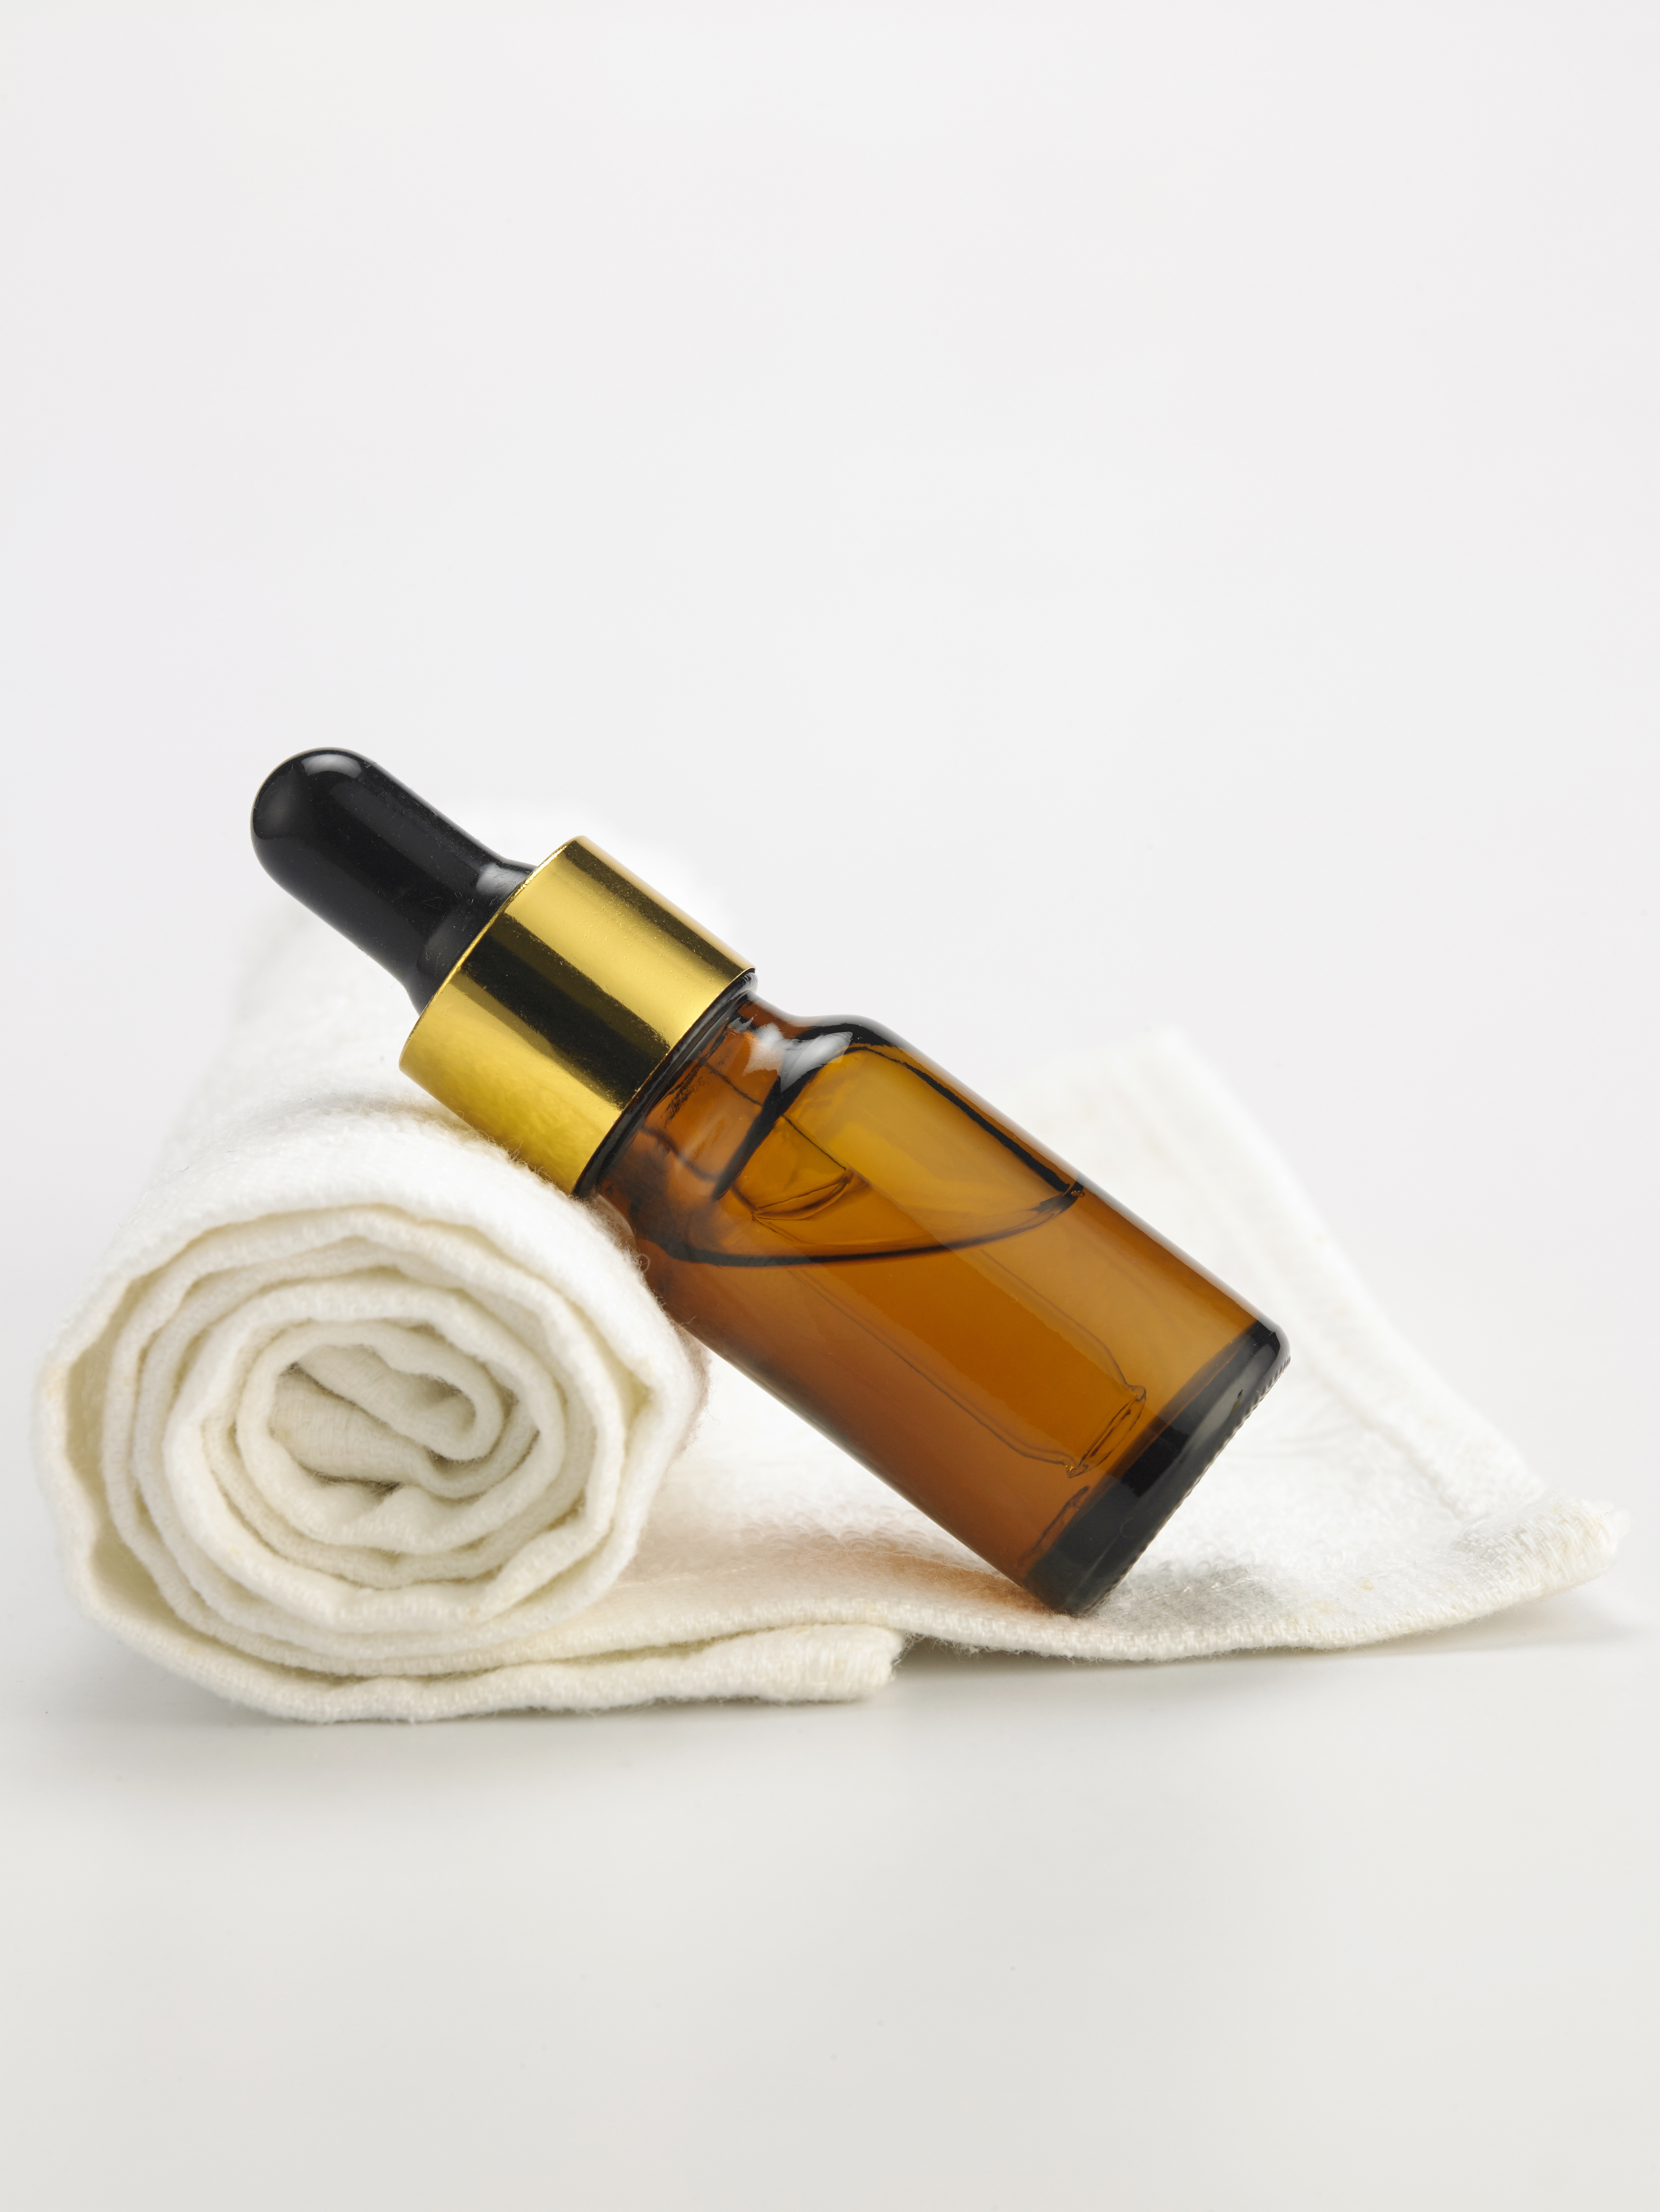 serum and hand towel, healthy-skin-after-40-face-oil